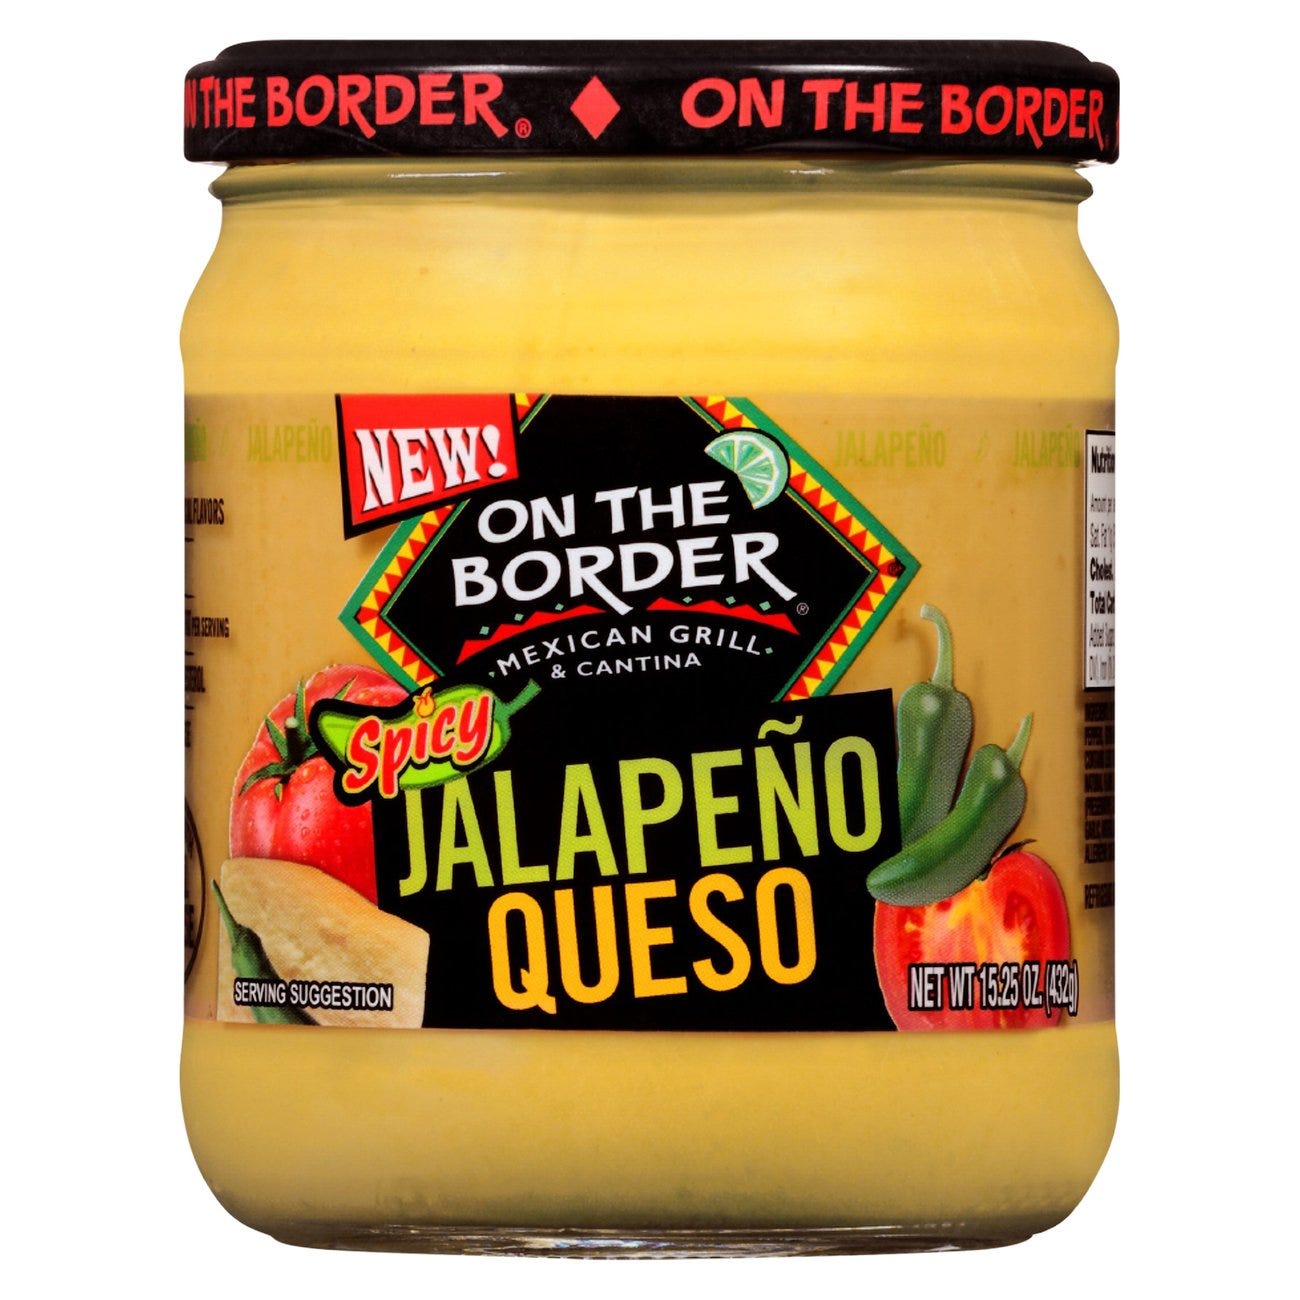 On The Border Spicy Jalapeno Queso - Shop Salsa & Dip at H-E-B